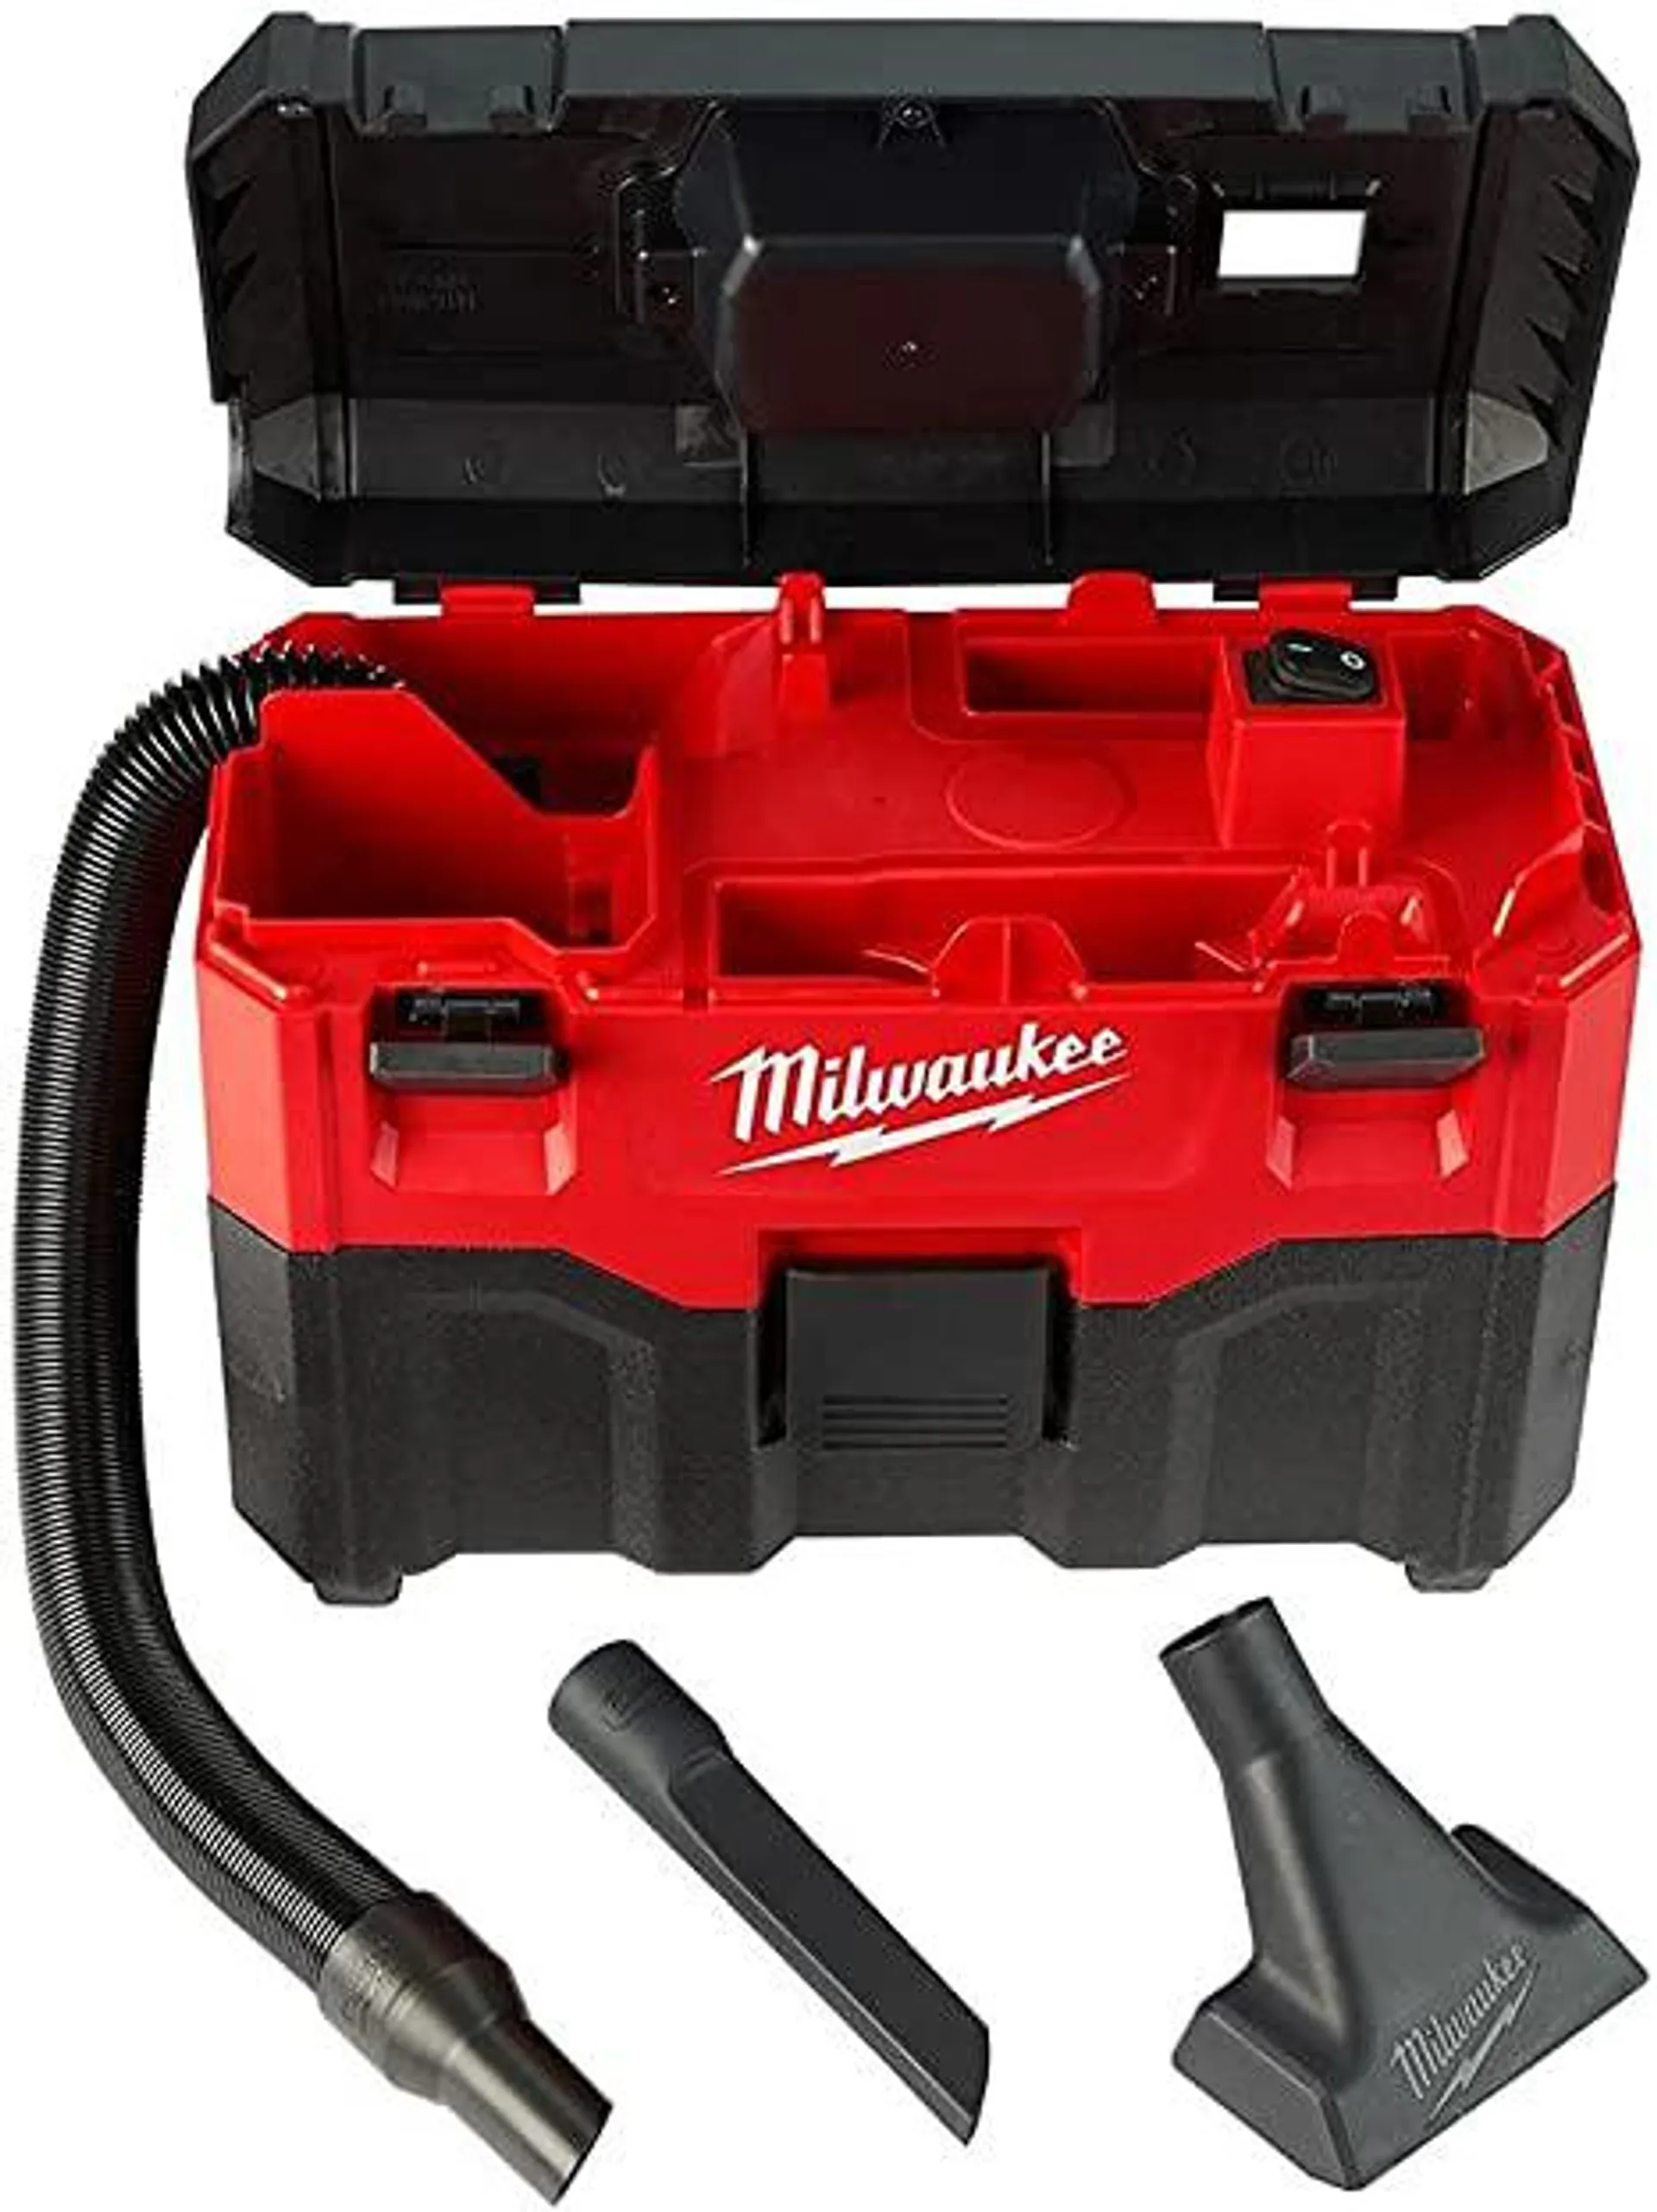 Milwaukee M18 2 Gal. 18-Volt Lithium-ion Cordless Wet/Dry Vacuum (Tool-Only), 2.8 Amp Motor, Lightweight, Tool-Box Style for Effortless Transport and Storage